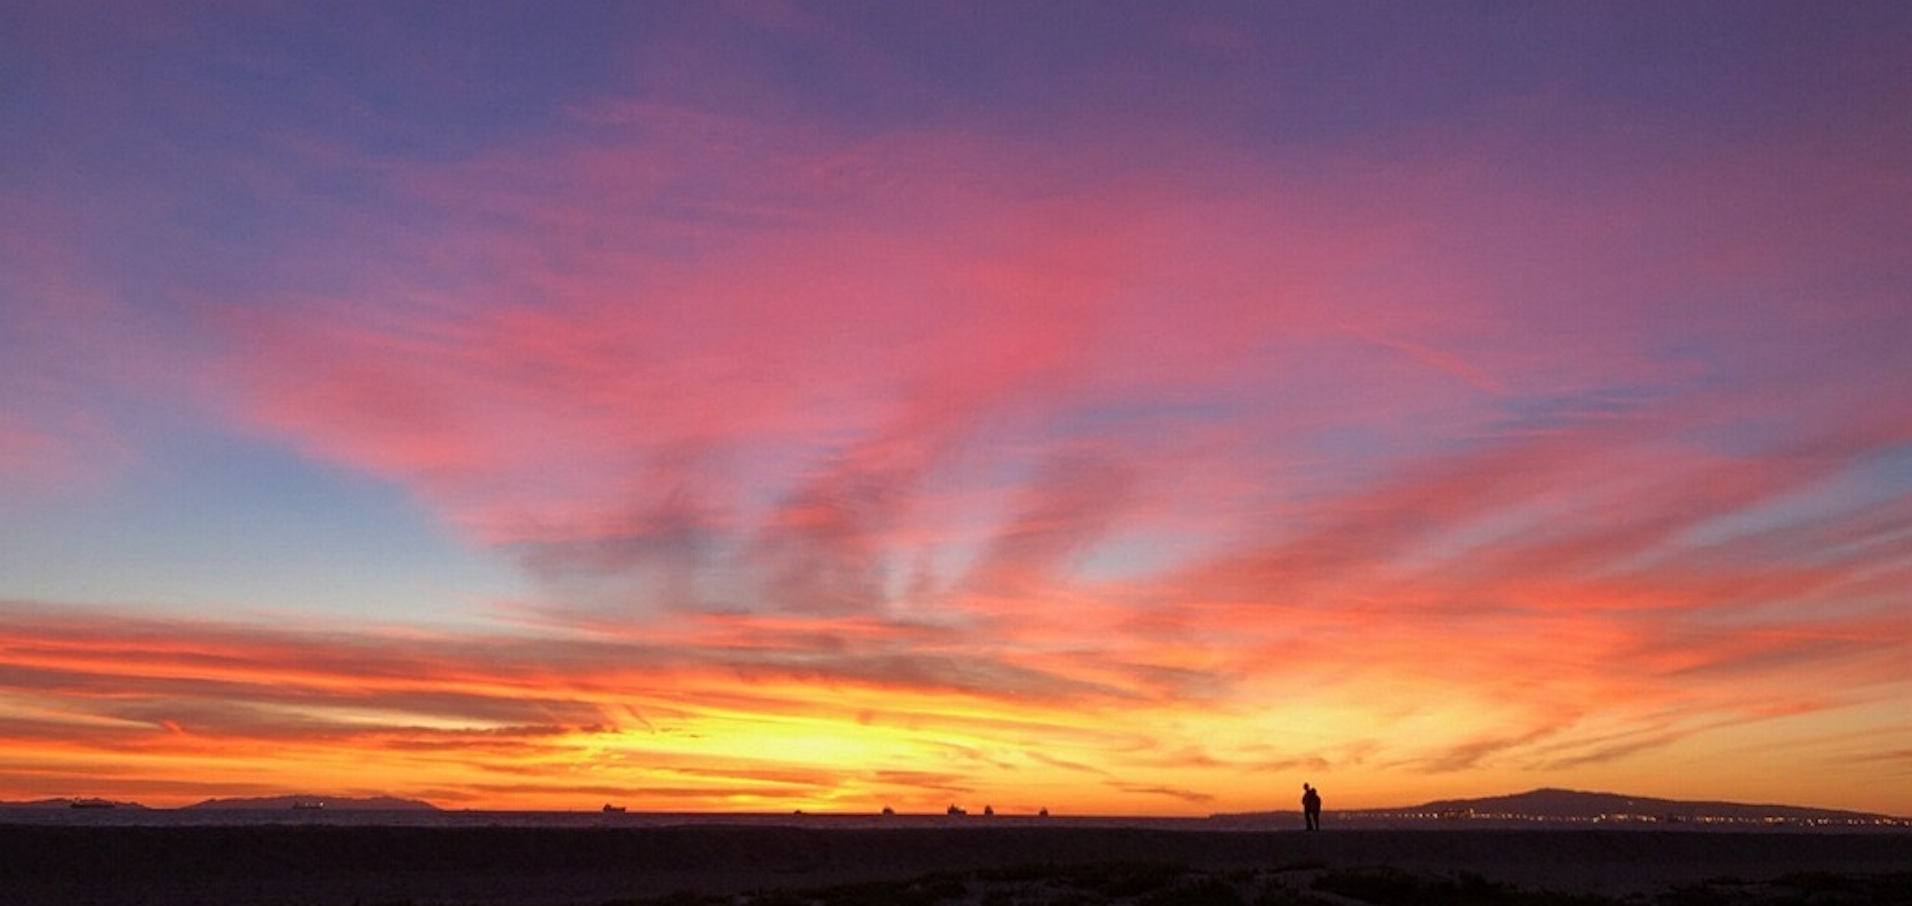 A sunset over Sunset Beach in Huntington Beach, CA. Image courtesy of project interviewees.